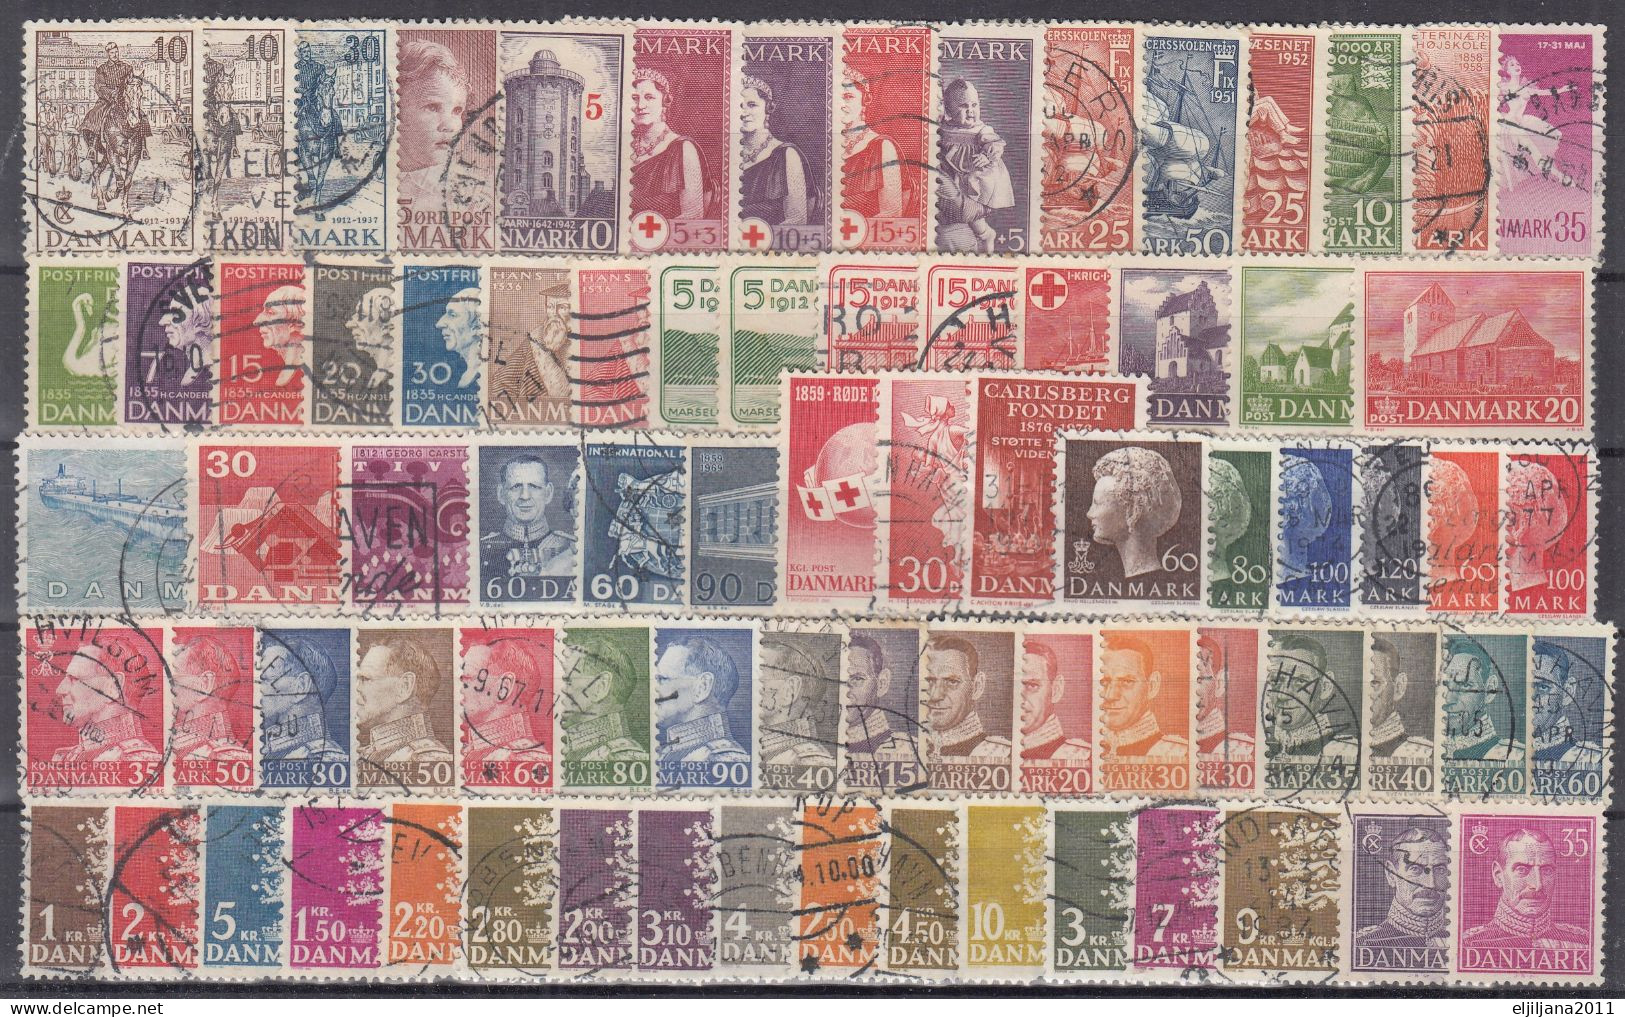 Action !! SALE !! 50 % OFF !! ⁕ DENMARK 1935 - 1976 ⁕ Nice Collection / Lot ⁕ 79v Used & MH - Collezioni